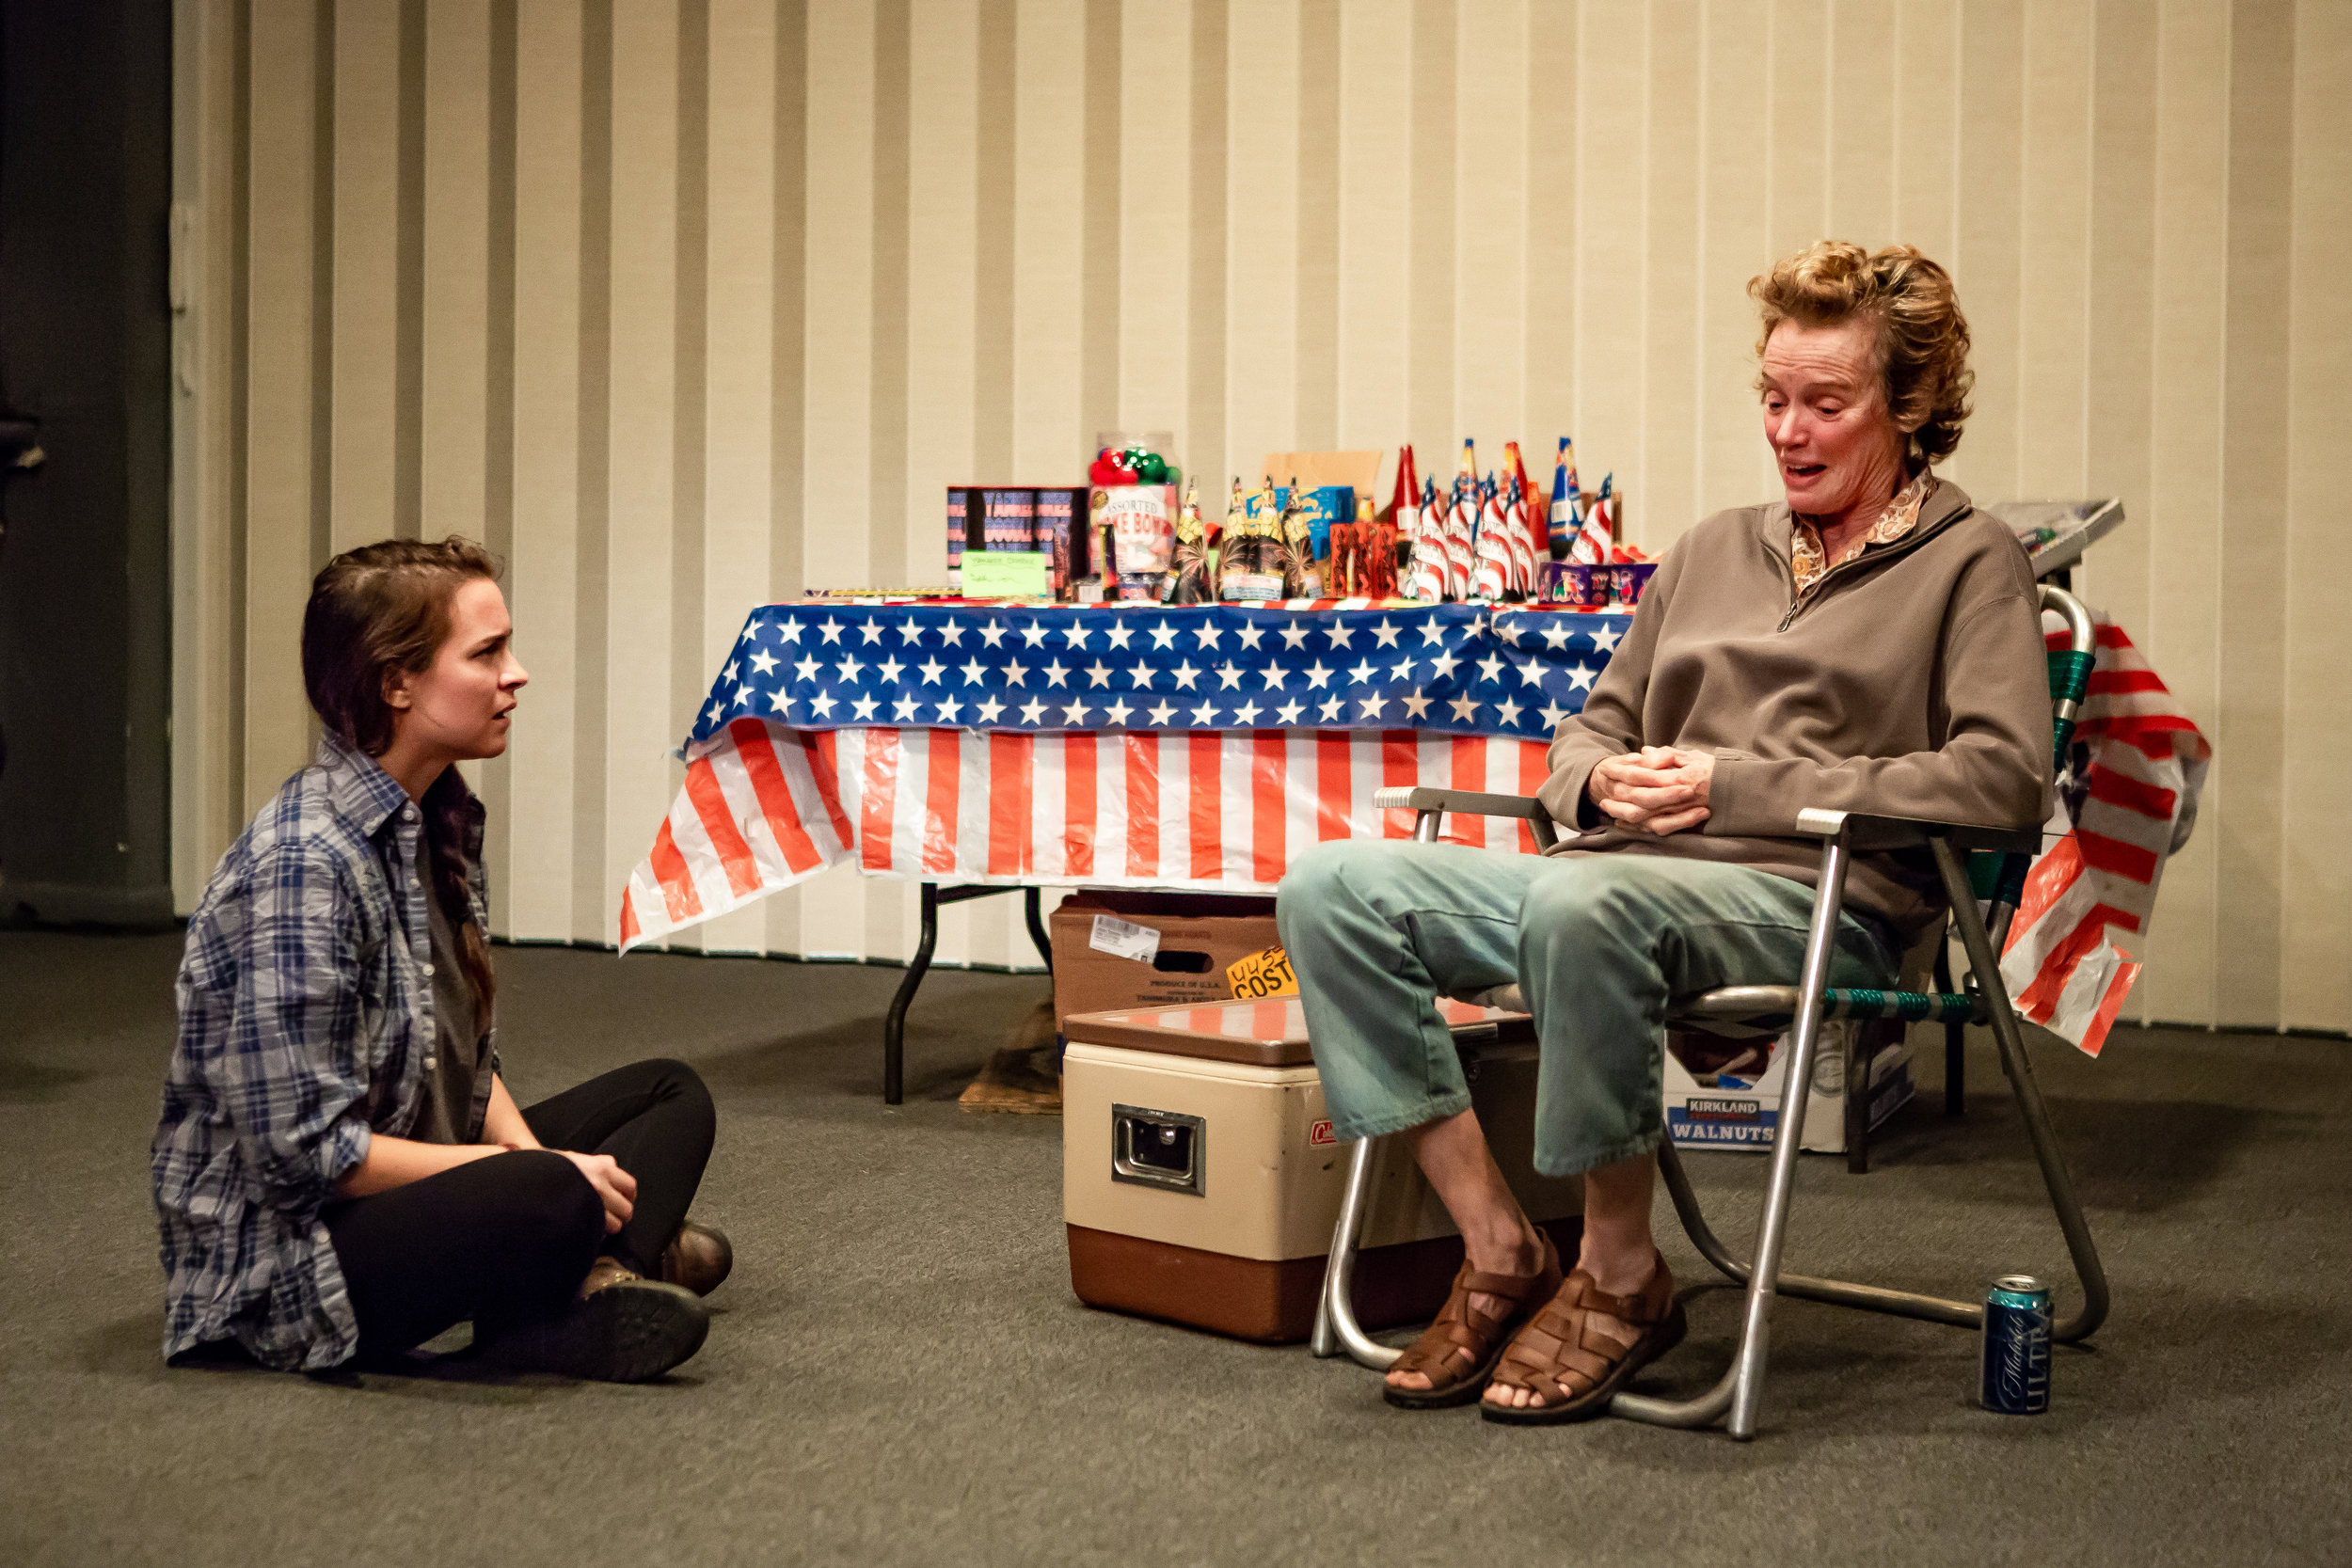 Leah Karpel and Kristin Griffith in LEWISTON, part of LEWISTON : CLARKSTON at Rattlestick Playwrights Theater - Photo by Jeremy Daniel (4).JPG